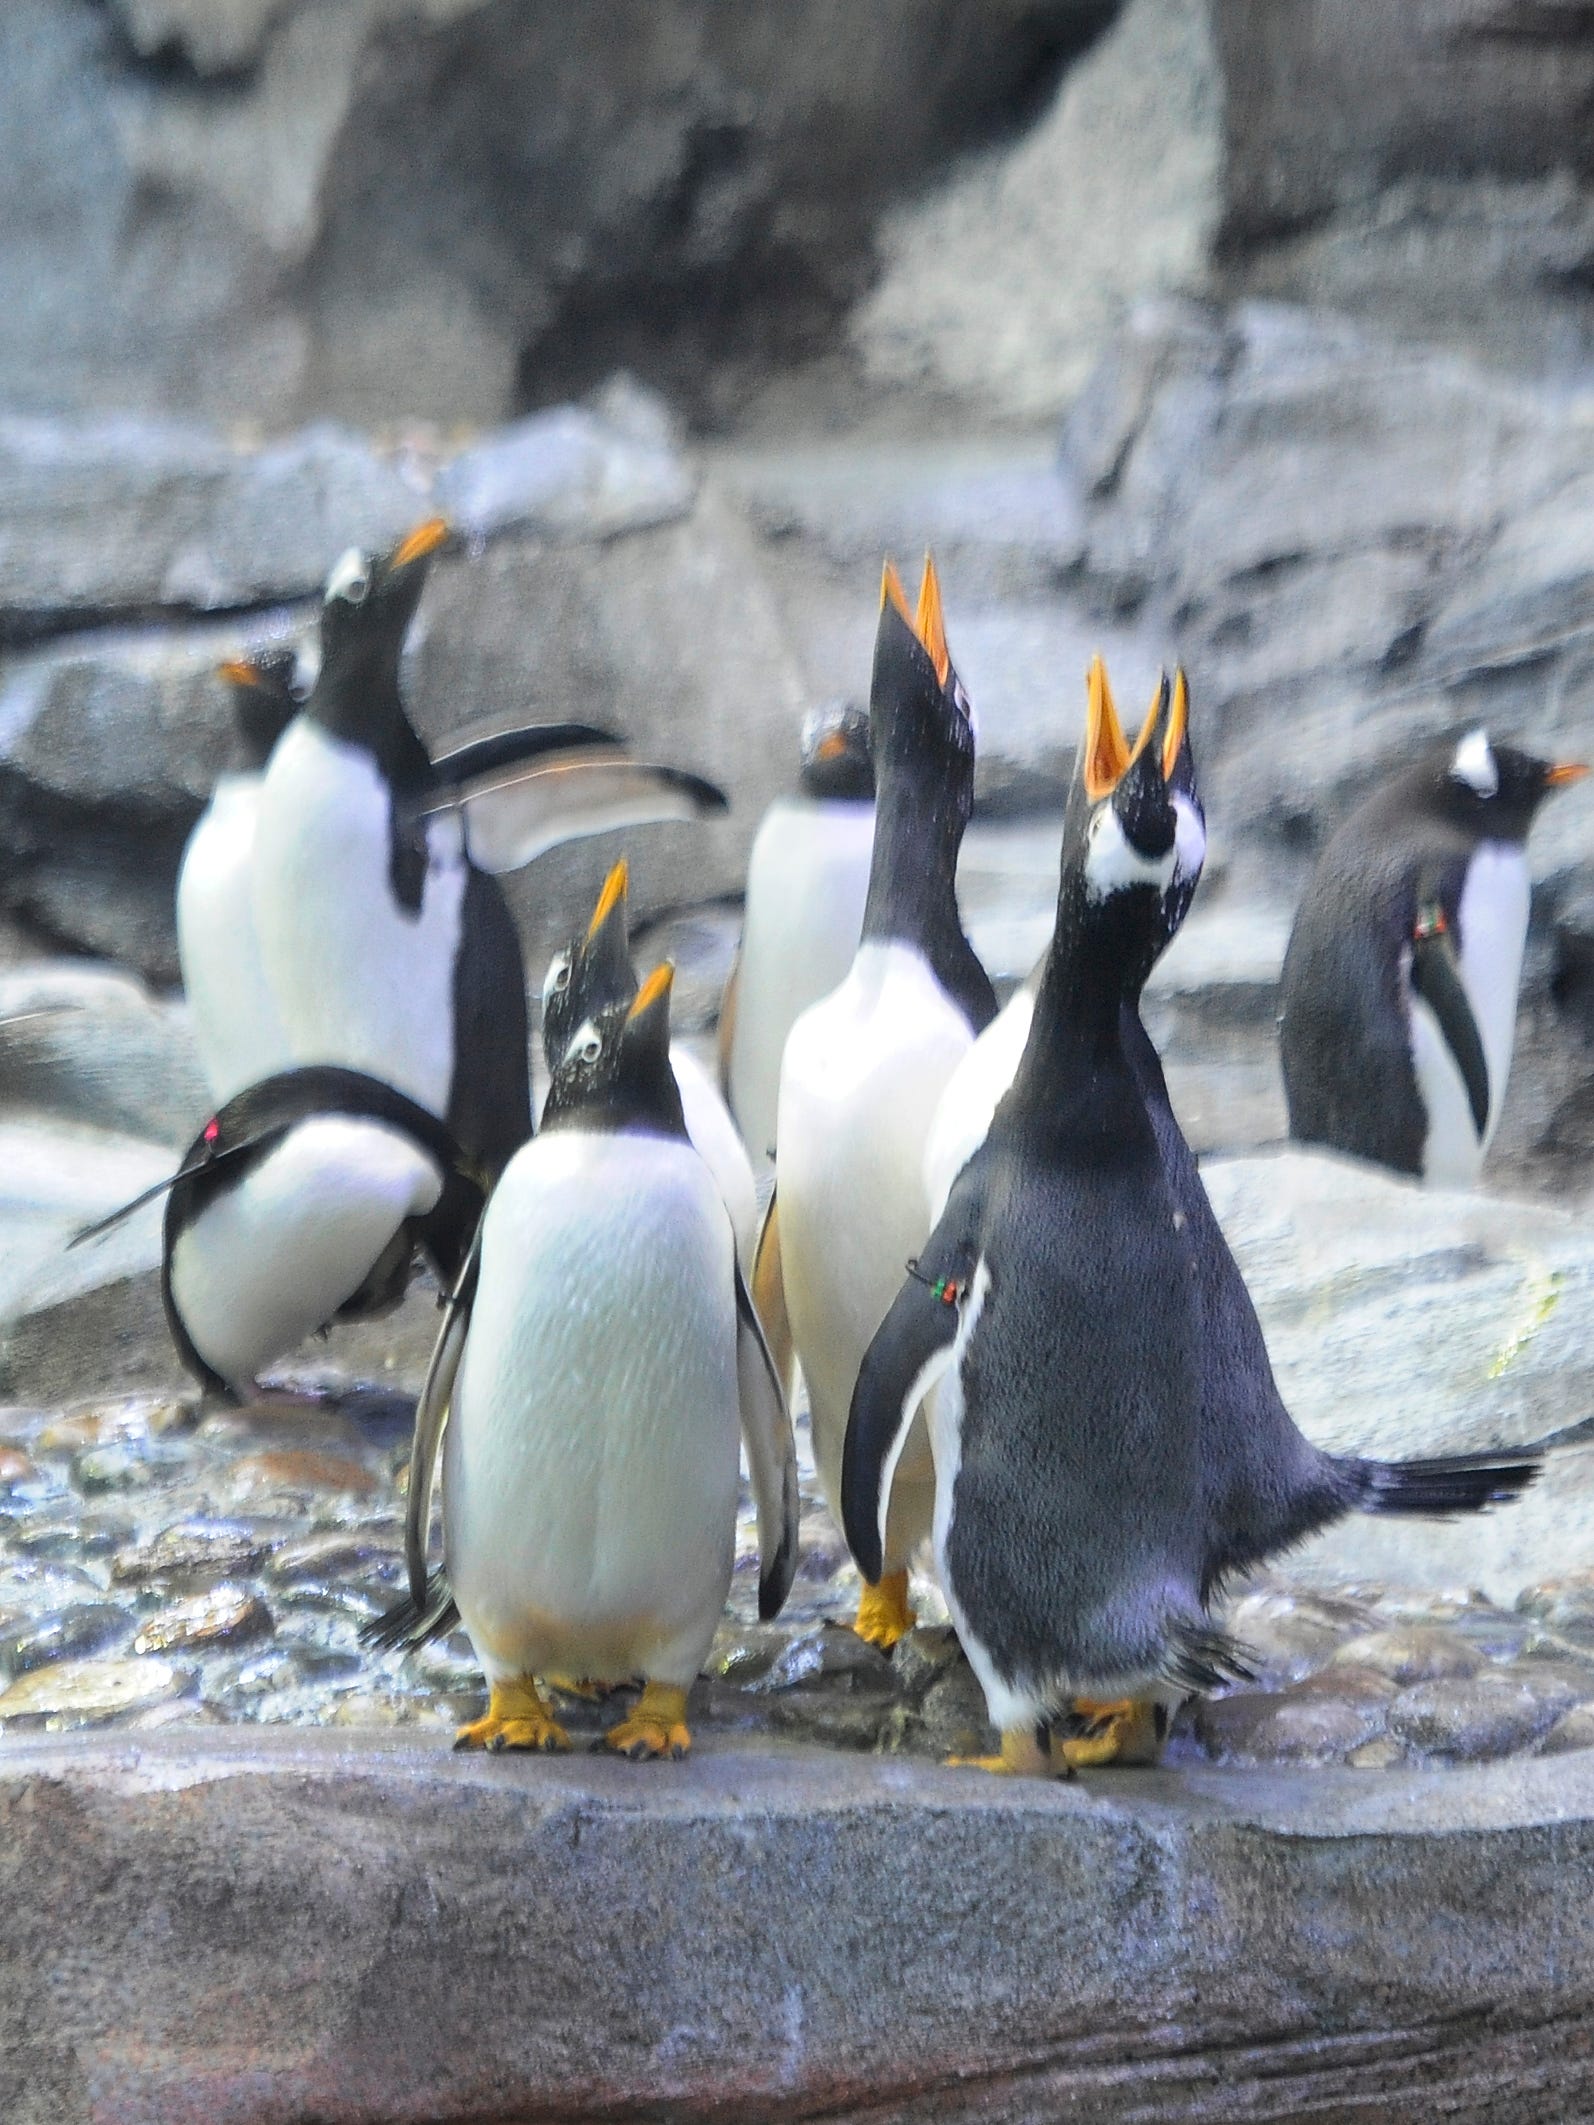 The Polk Penguin Conservation Center has 10 times the volume of water as the penguins'  former habitat, the Penguinarium.